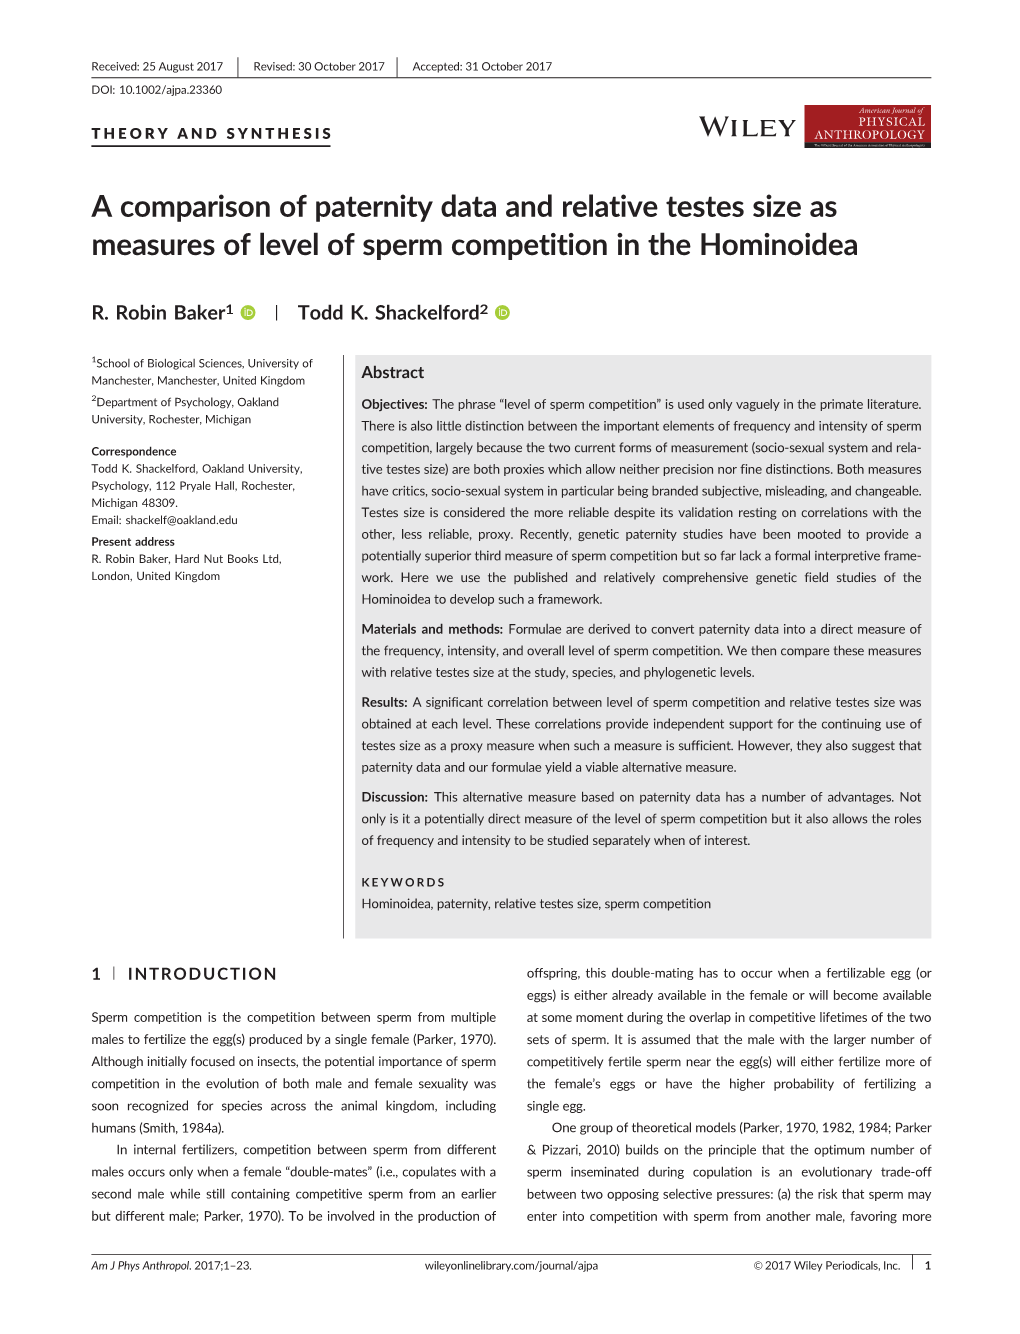 A Comparison of Paternity Data and Relative Testes Size As Measures of Level of Sperm Competition in the Hominoidea